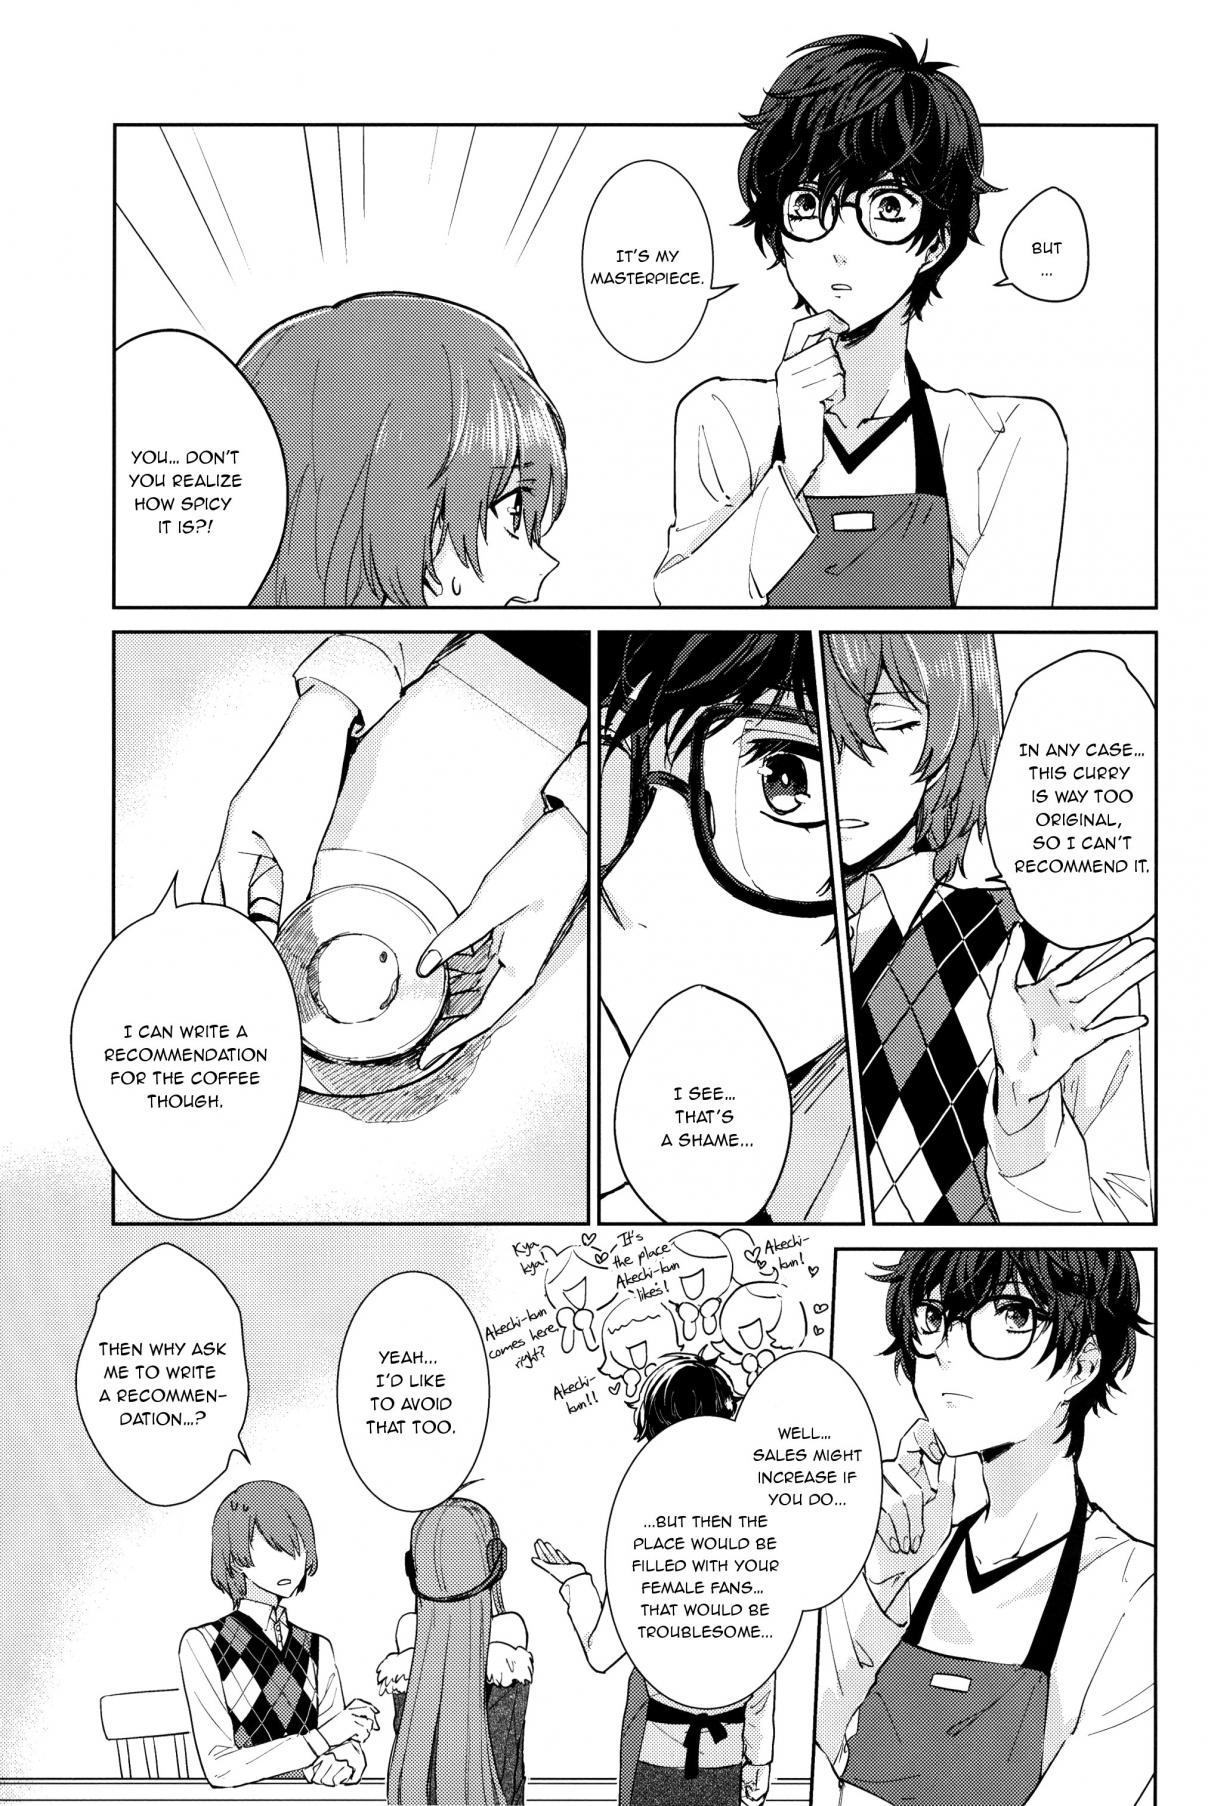 Persona 5 Character Anthology Ch. 9 Akechi san's recommendation